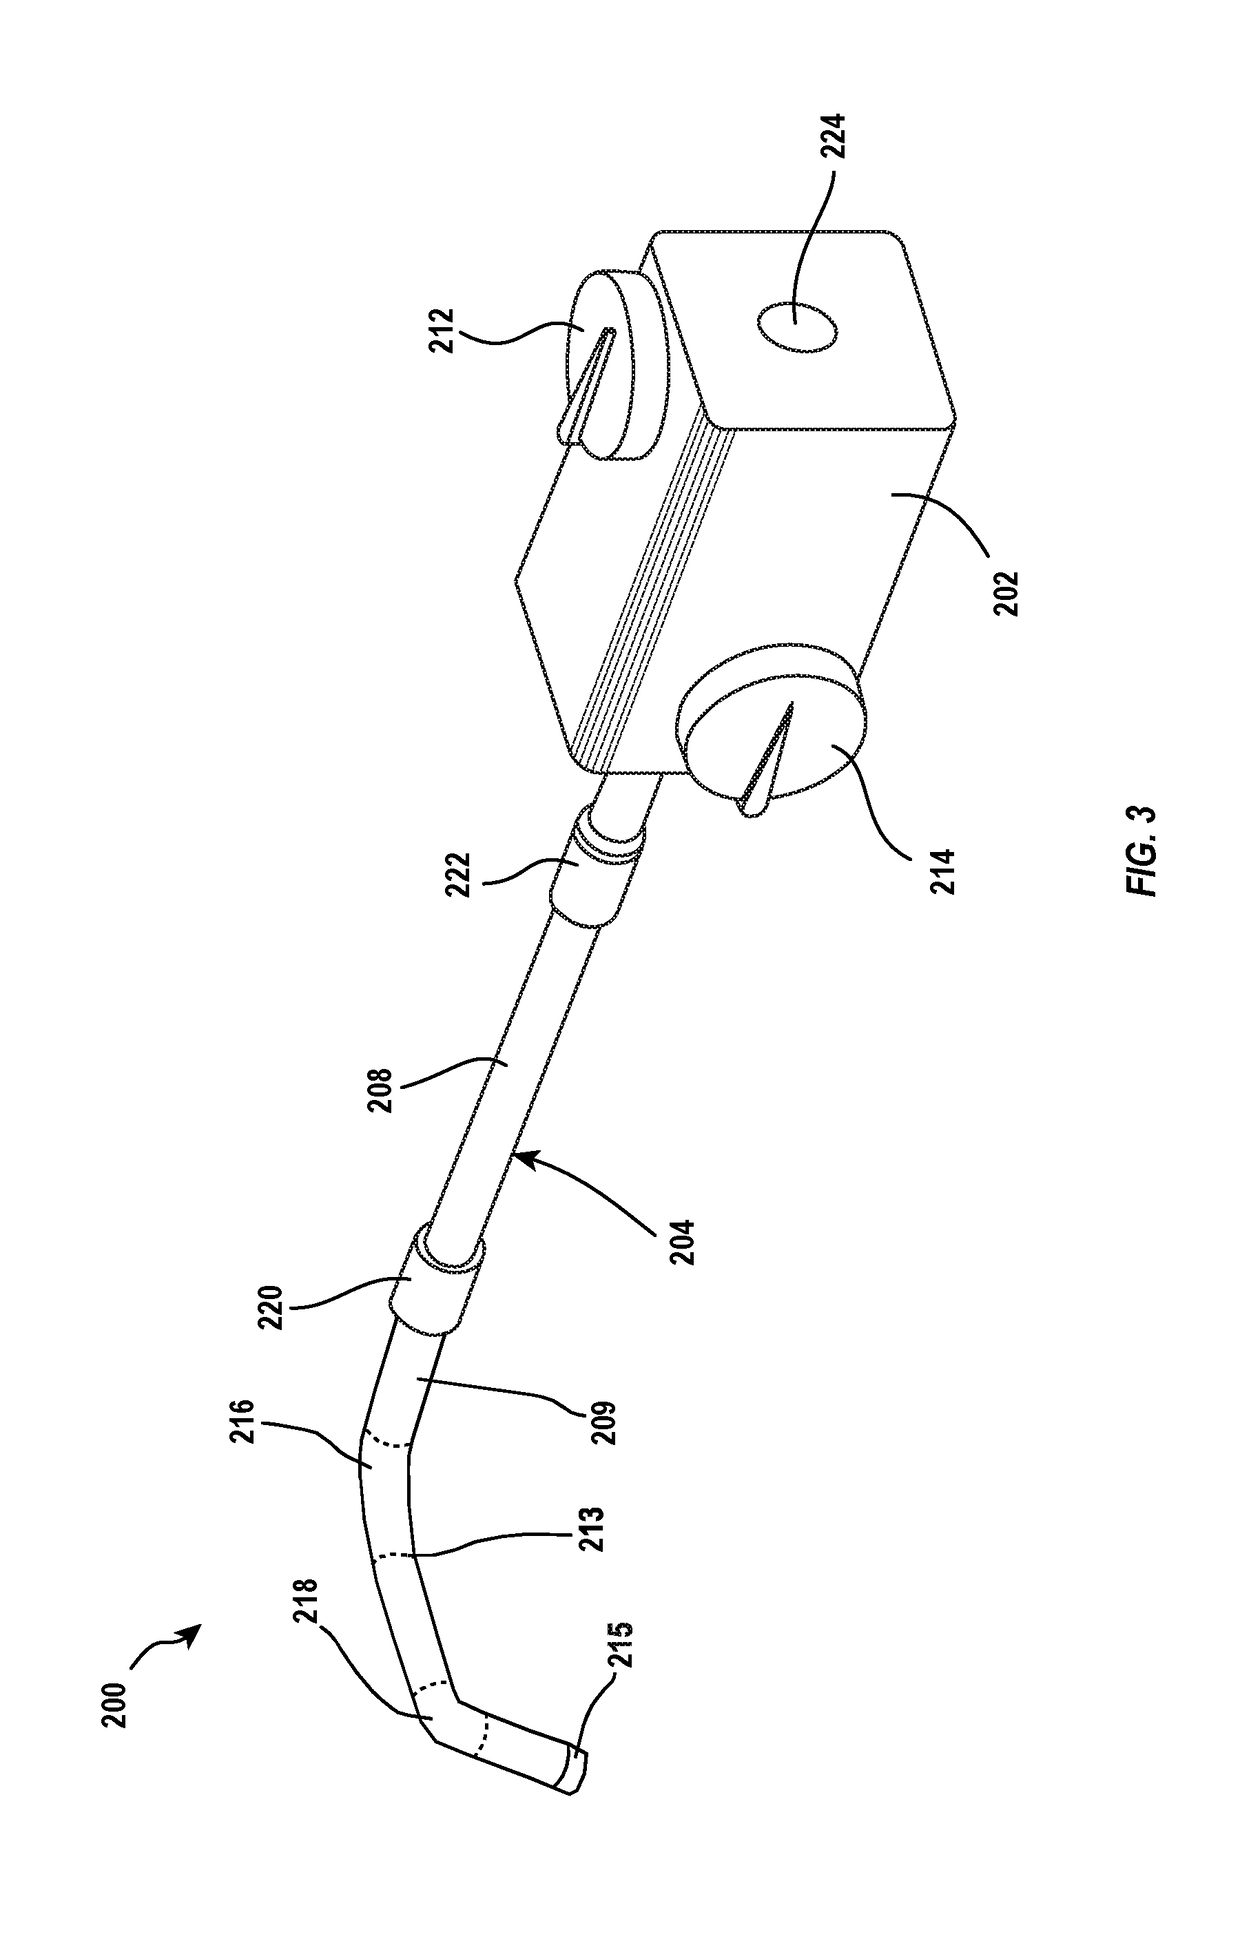 Intravascular delivery system with centralized steering